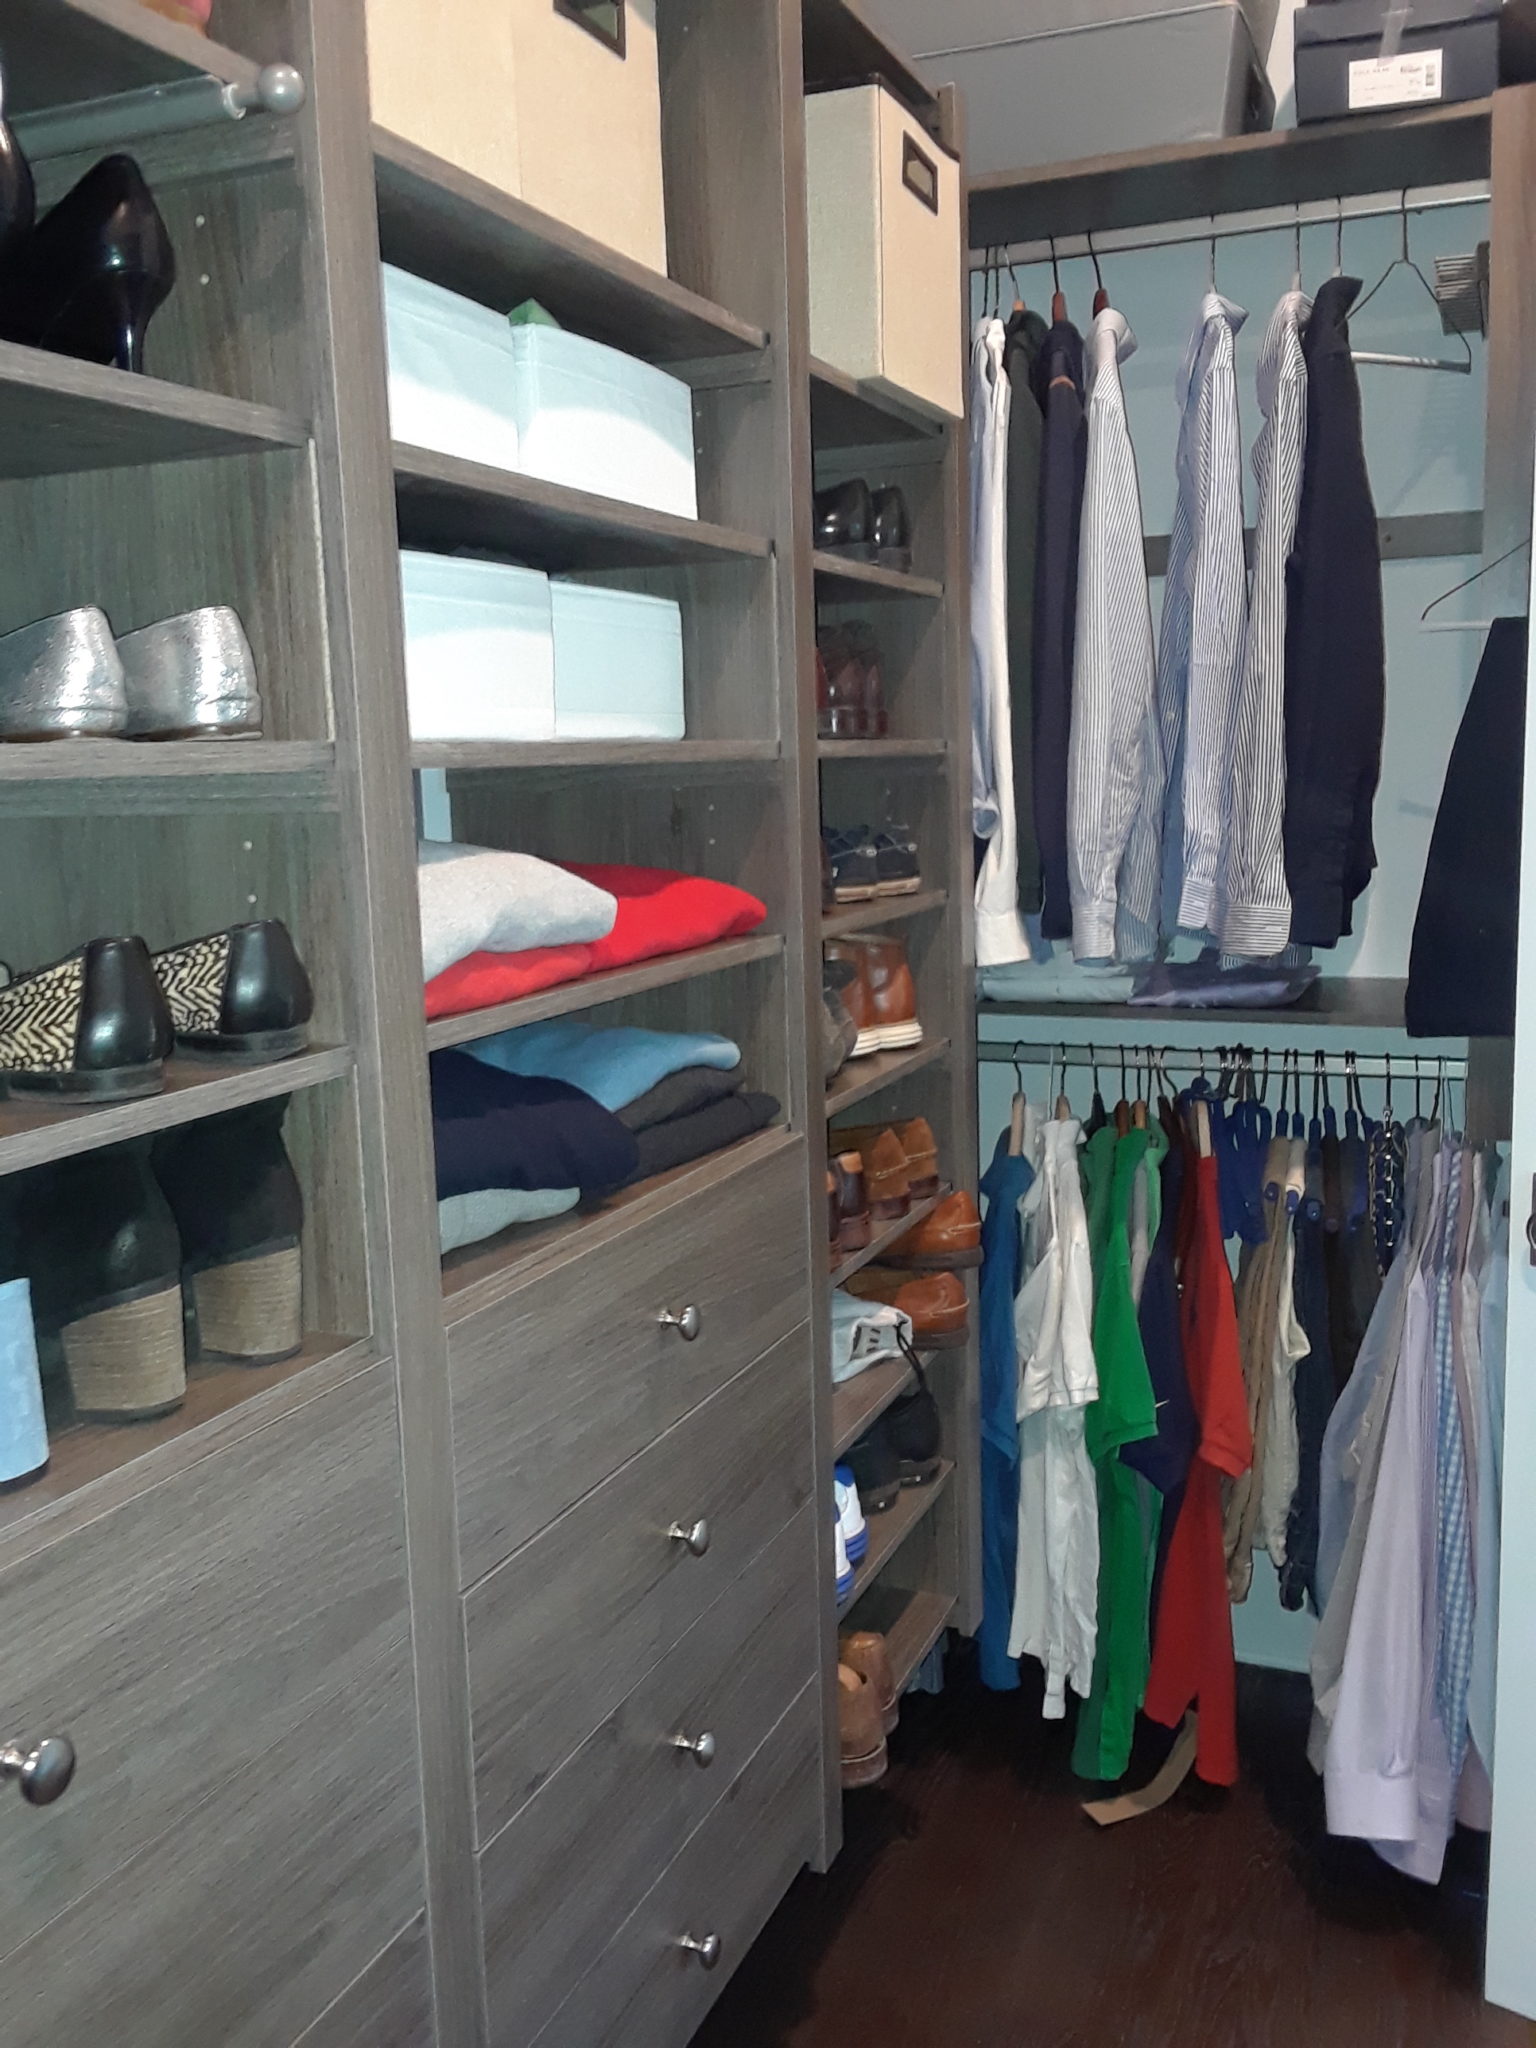 Shoe Storage in the Closet - Victory Closets